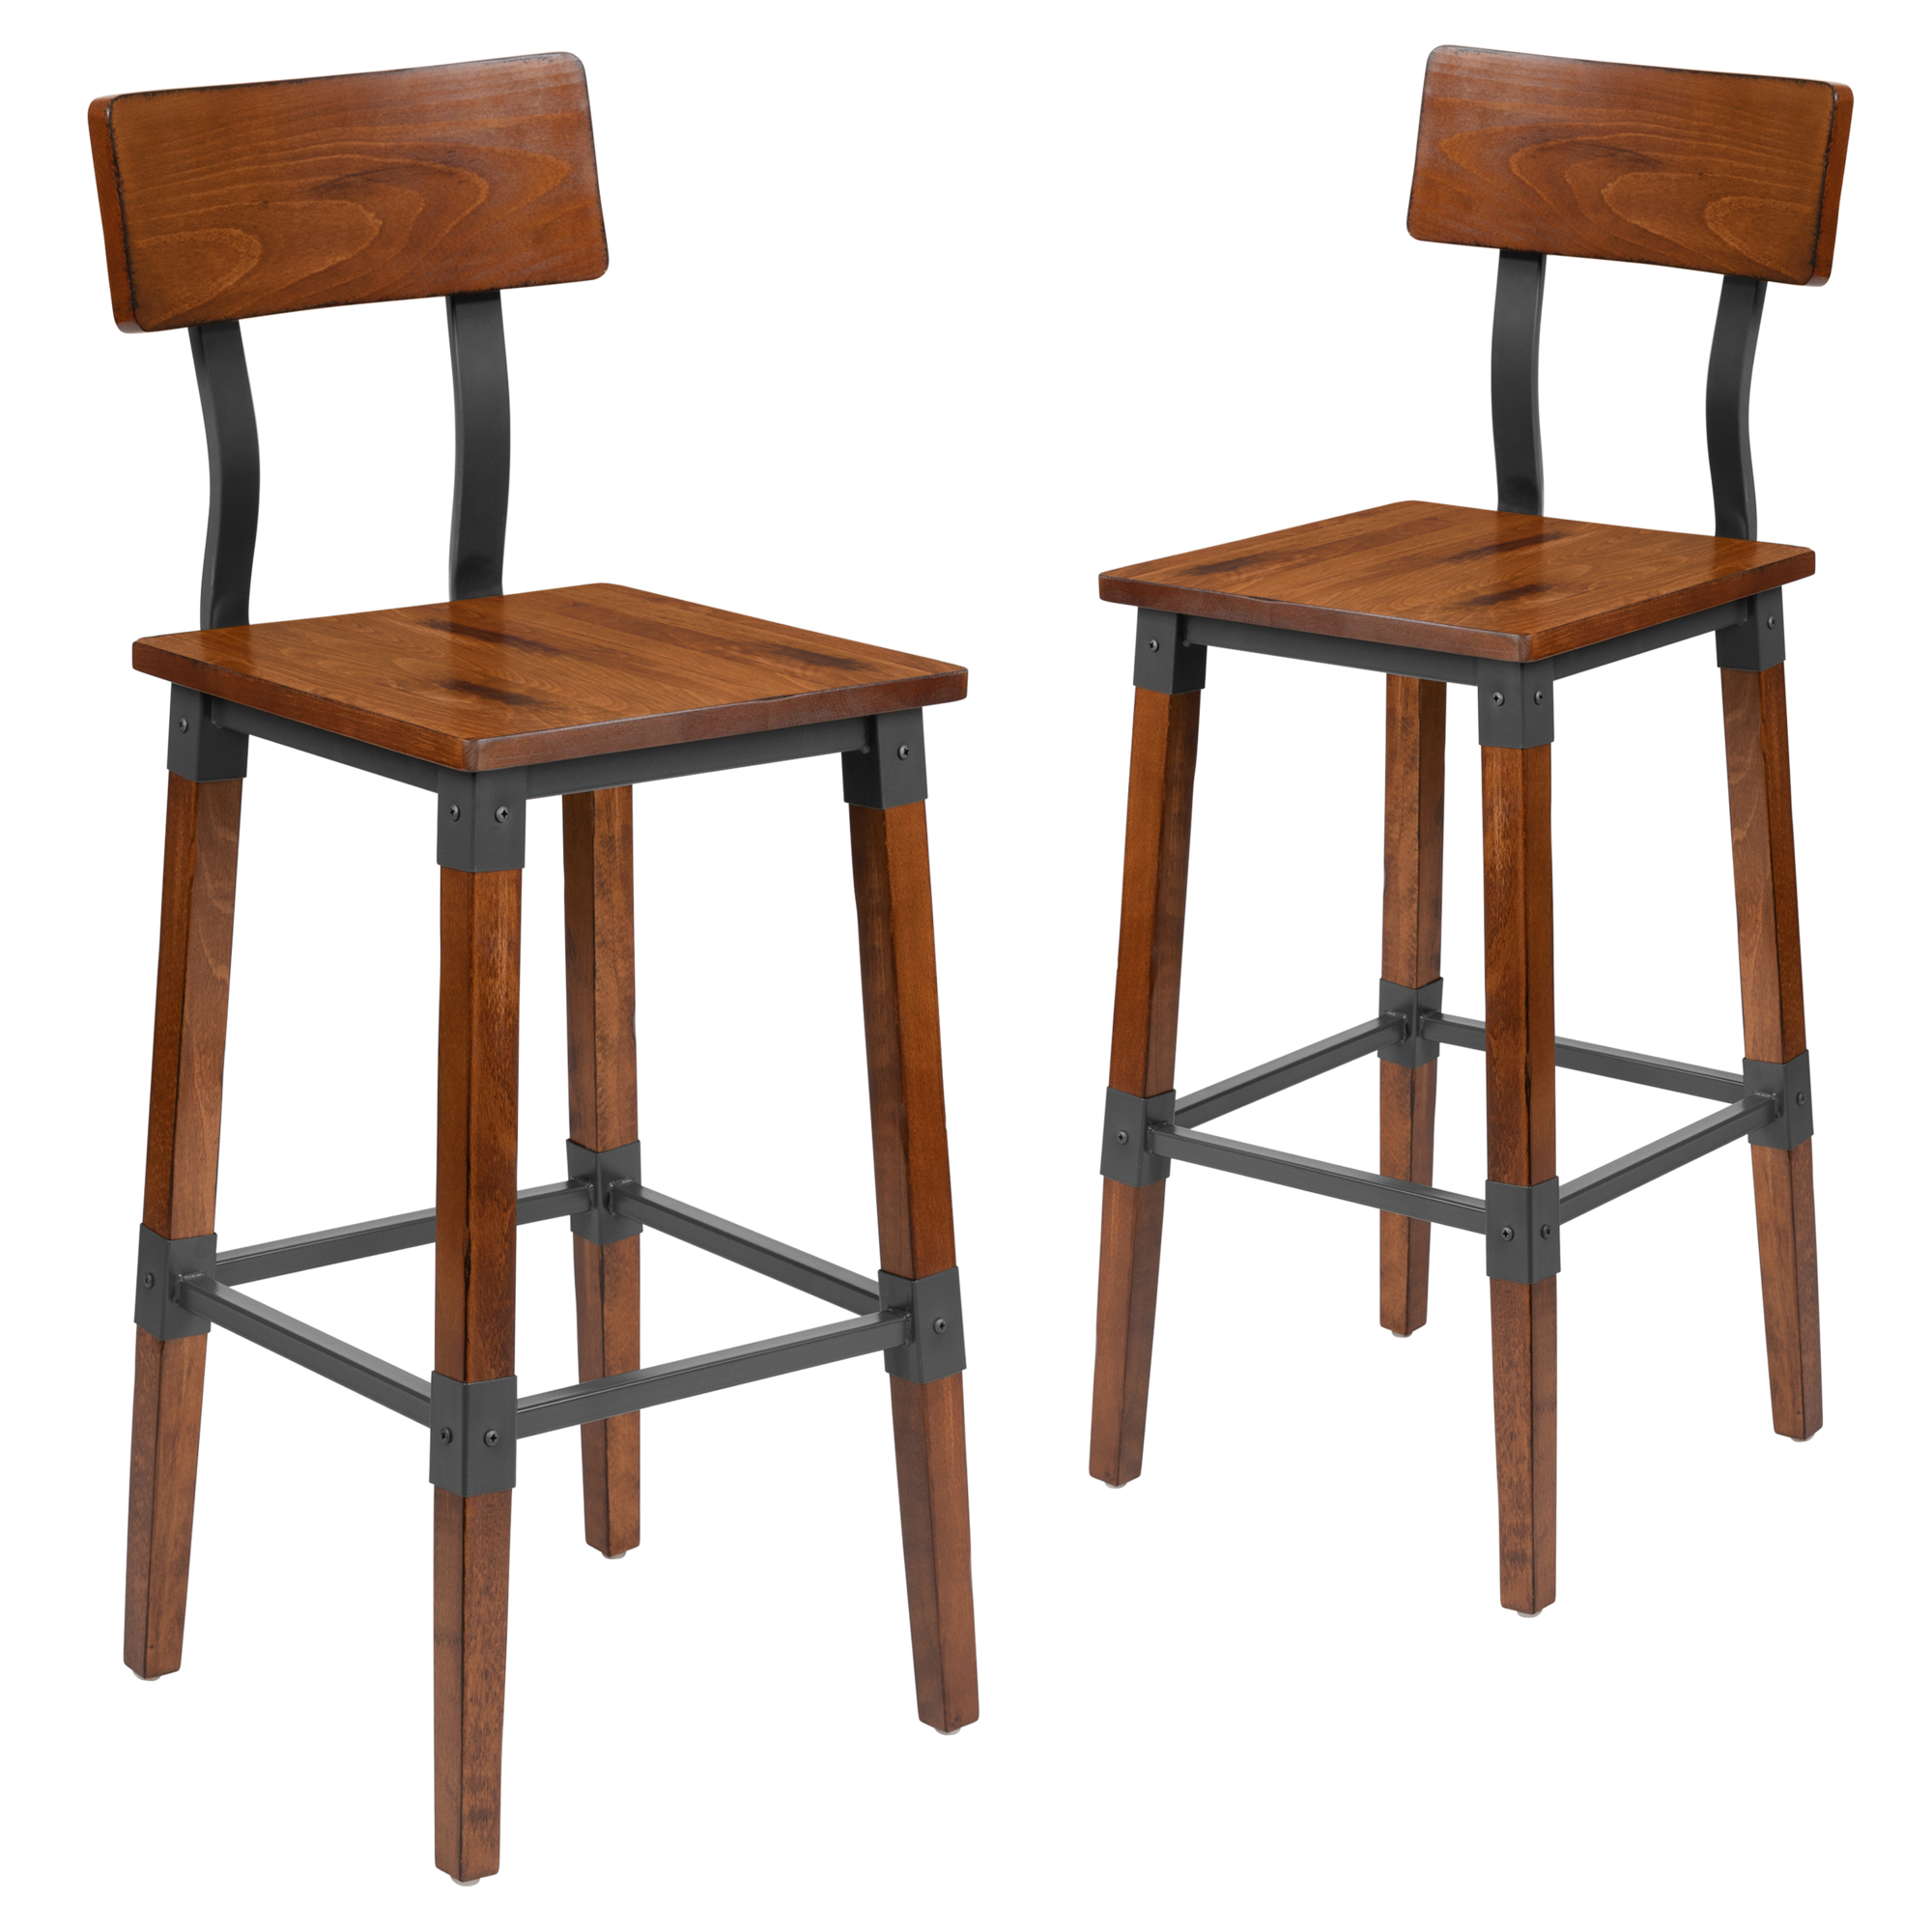 Flash Furniture, 2 PK Rustic Walnut Industrial Wood Dining Barstool, Primary Color Brown, Included (qty.) 2, Model 2XUDGW0236B